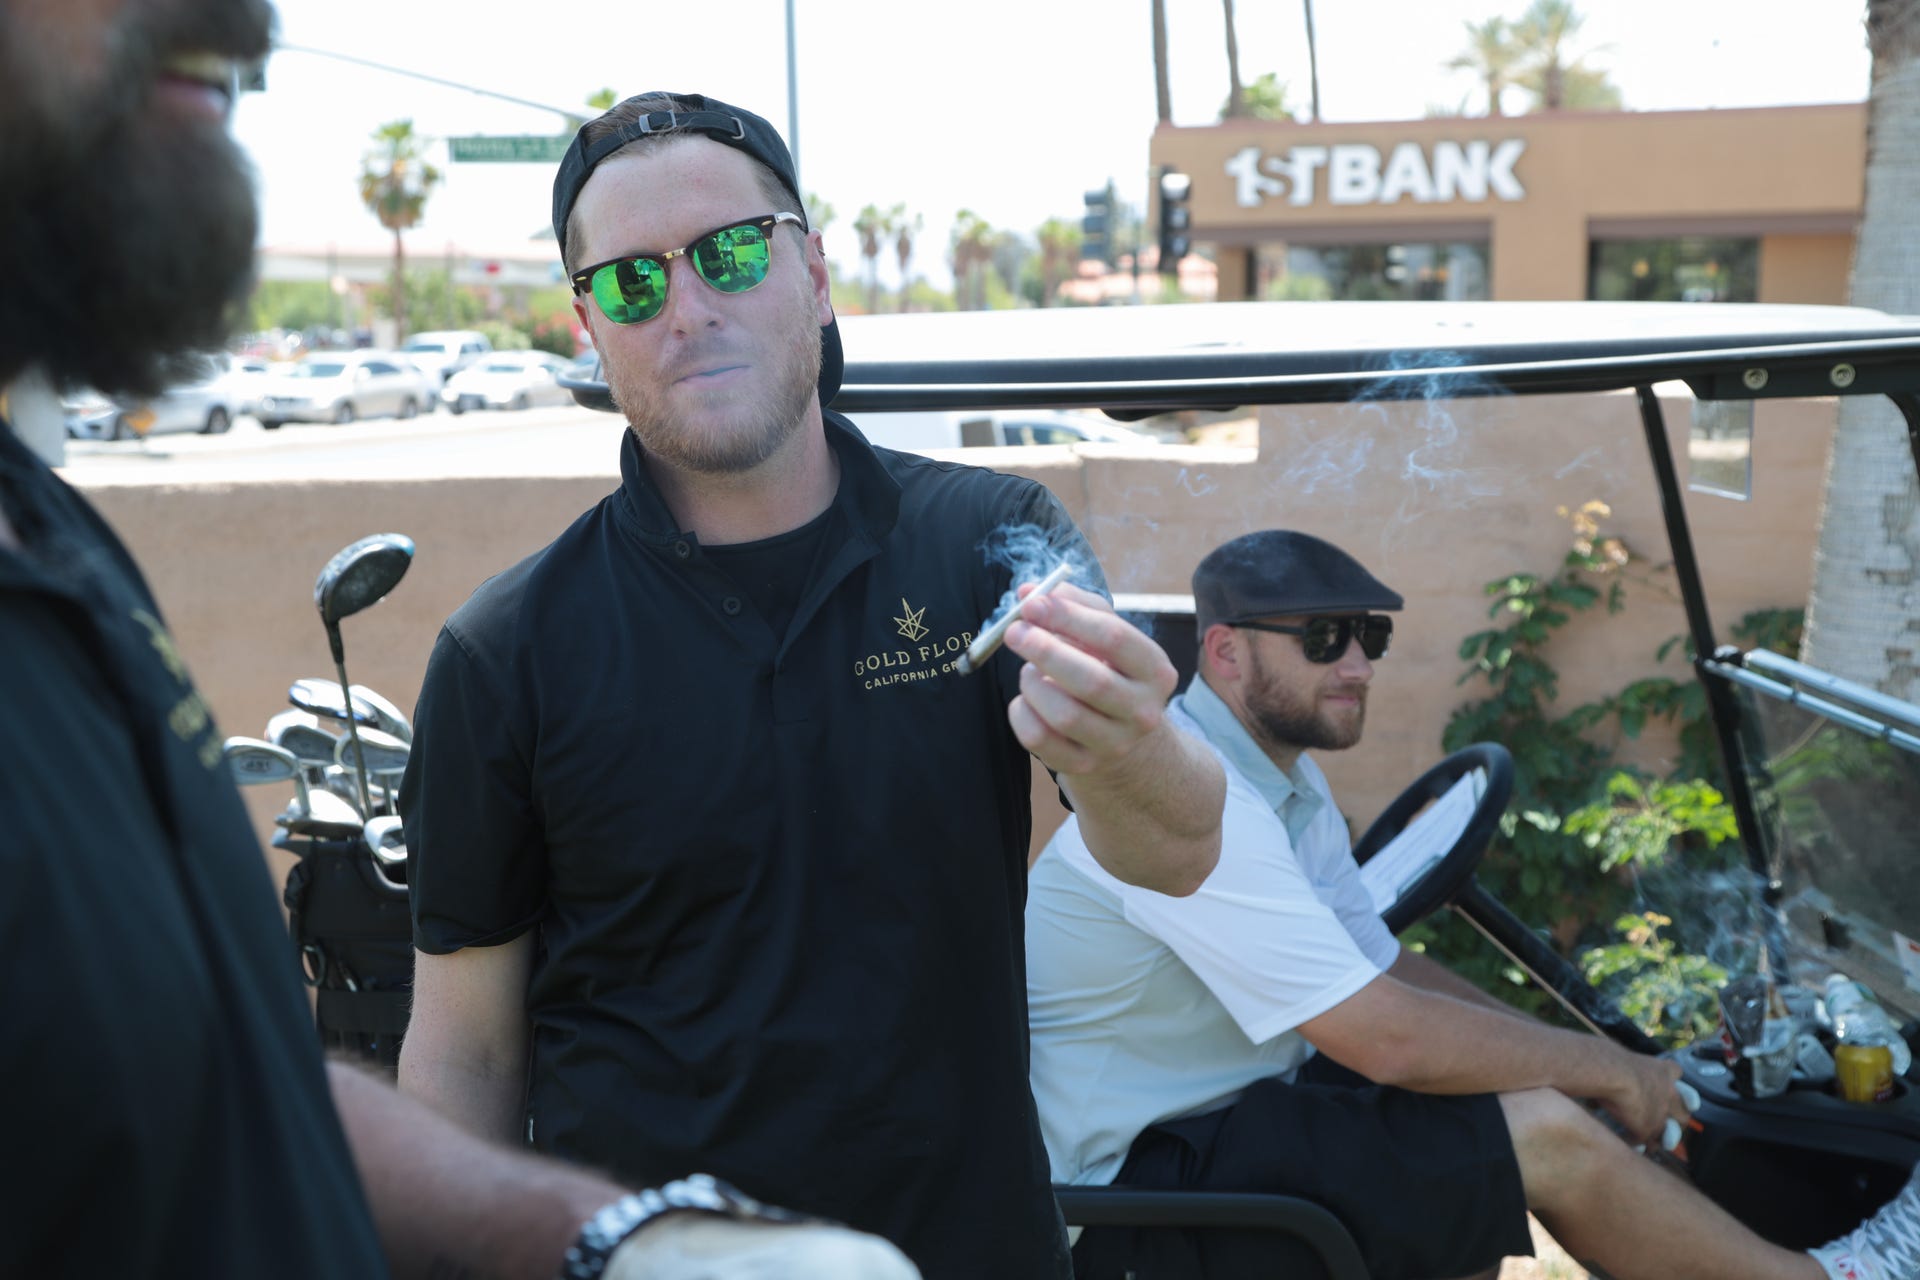 Perry Holcomb passes a joint between his group of golfers at the Coachella Valley Cannabis Alliance Network's charity golf tournament, Palm Desert, Calif., May 11, 2019.